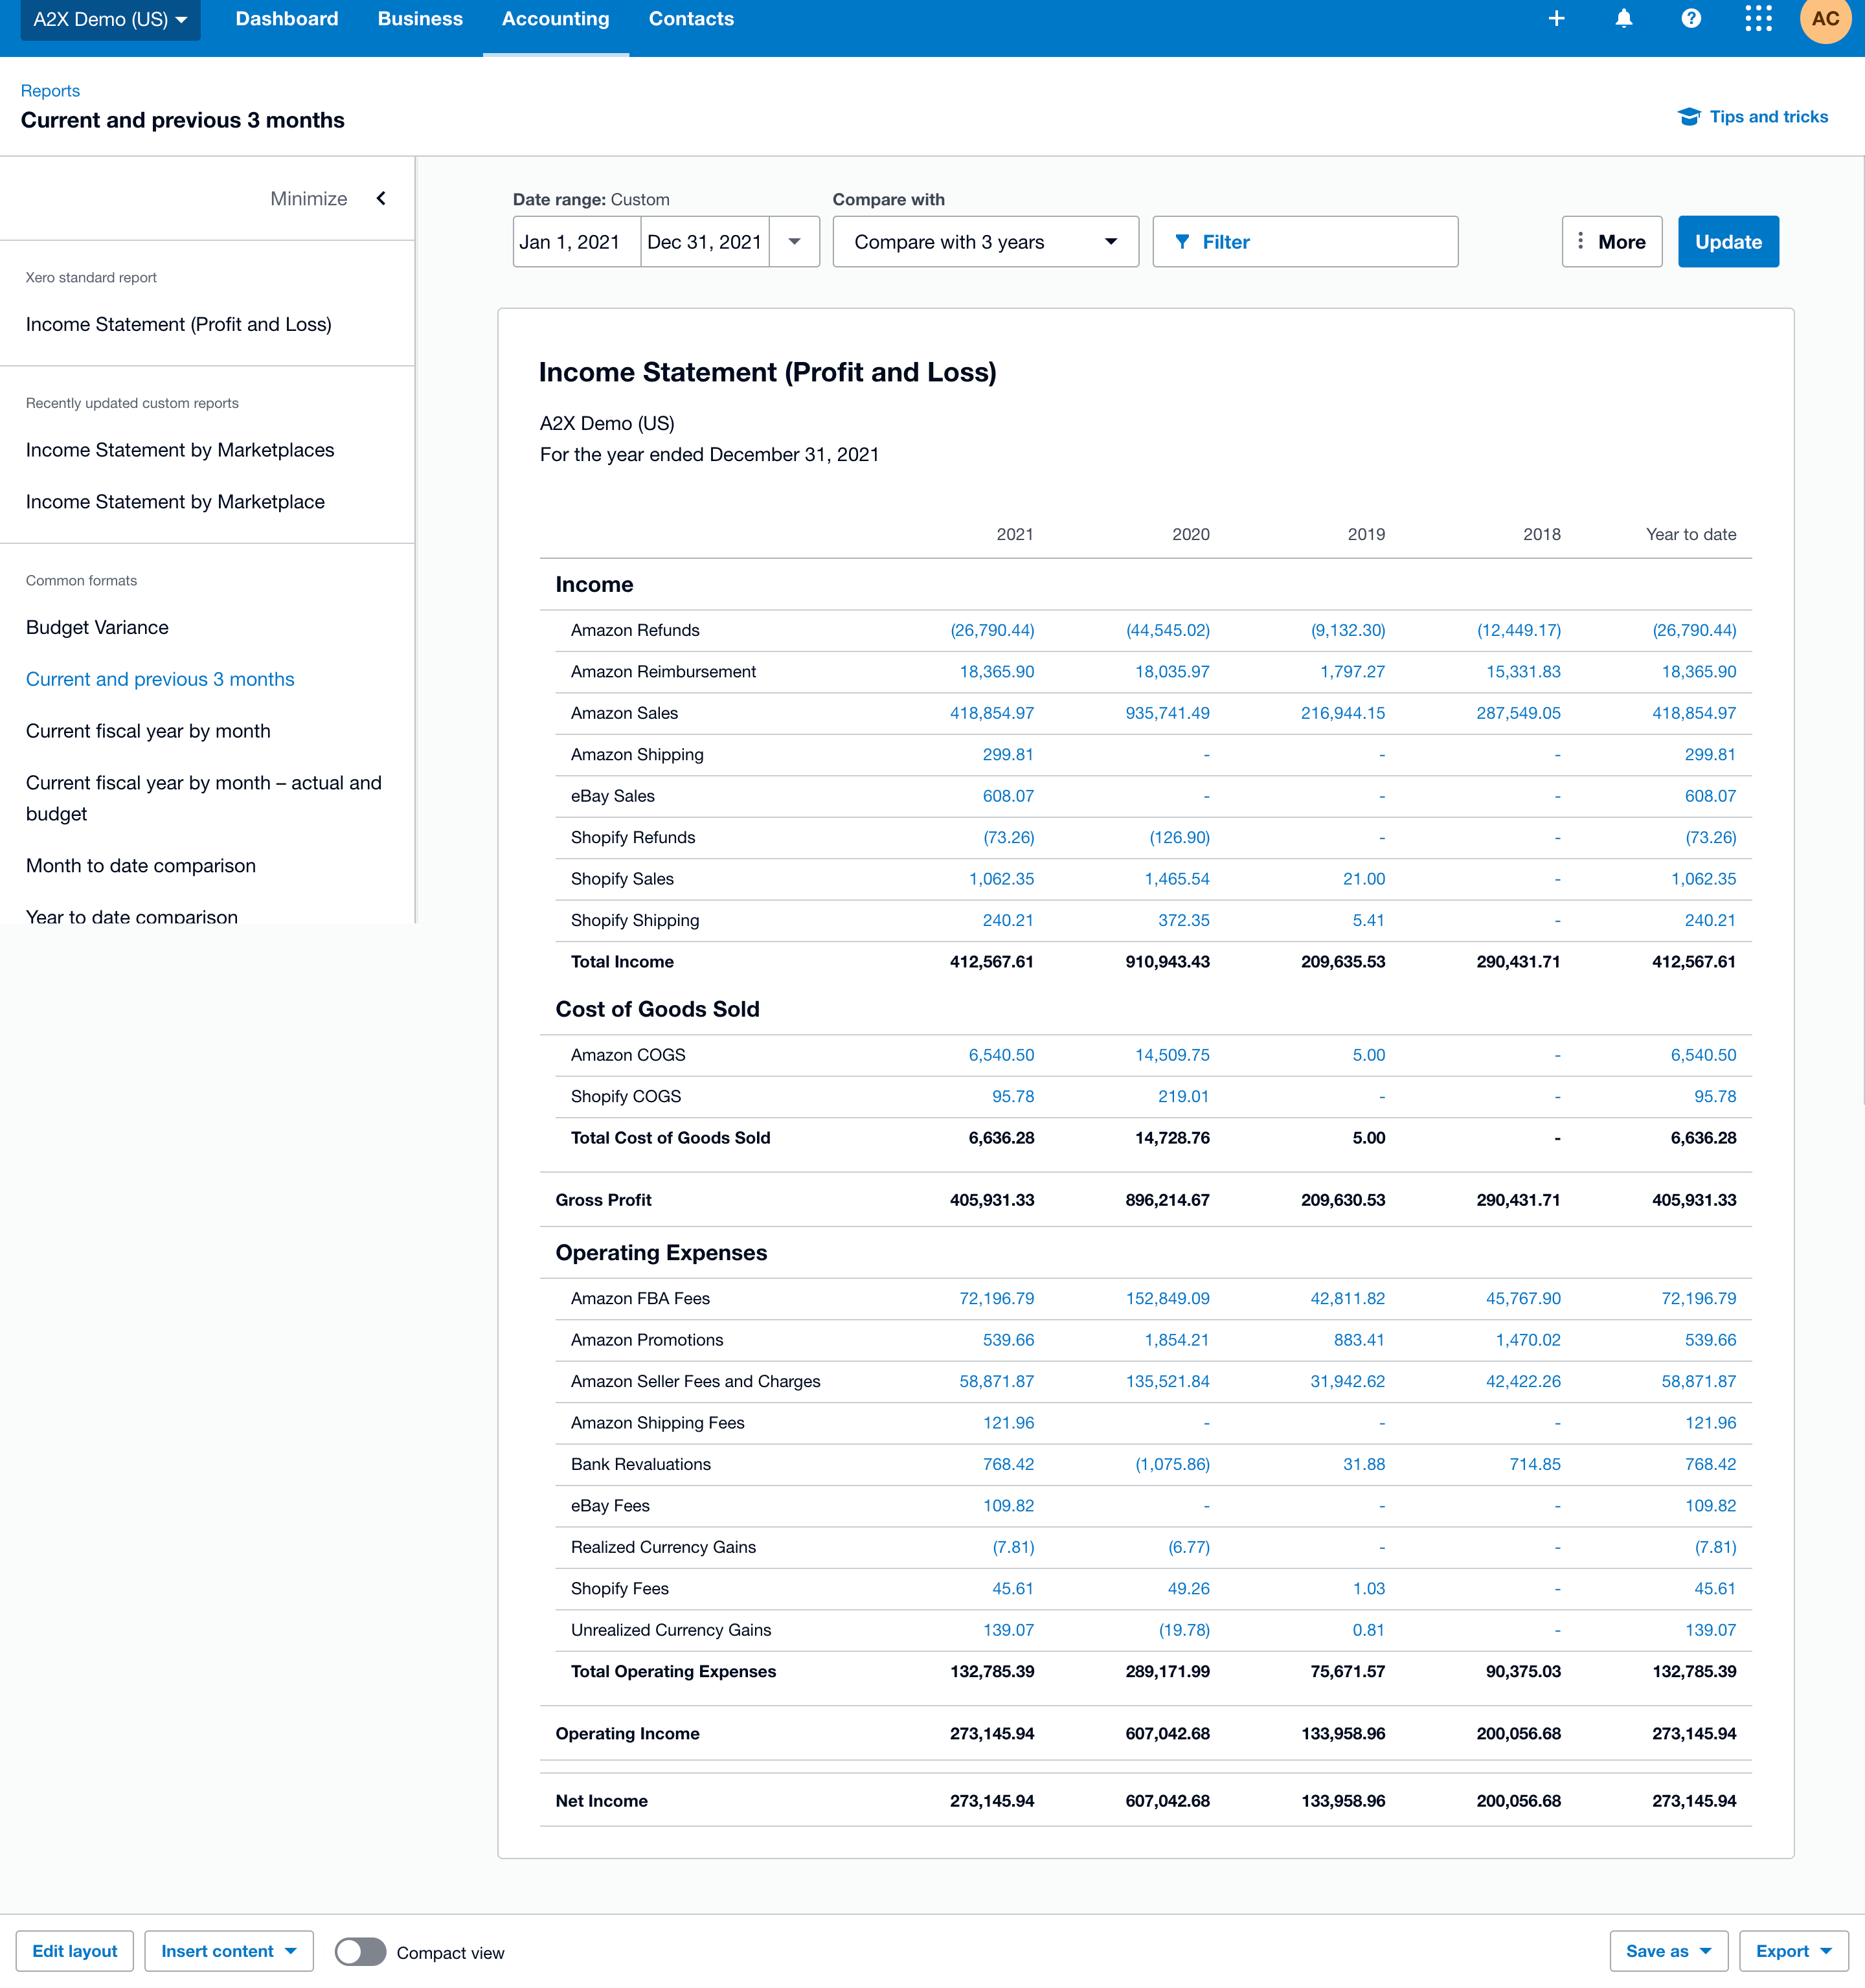 A screenshot showing what a Profit and Loss statement looks like in Xero